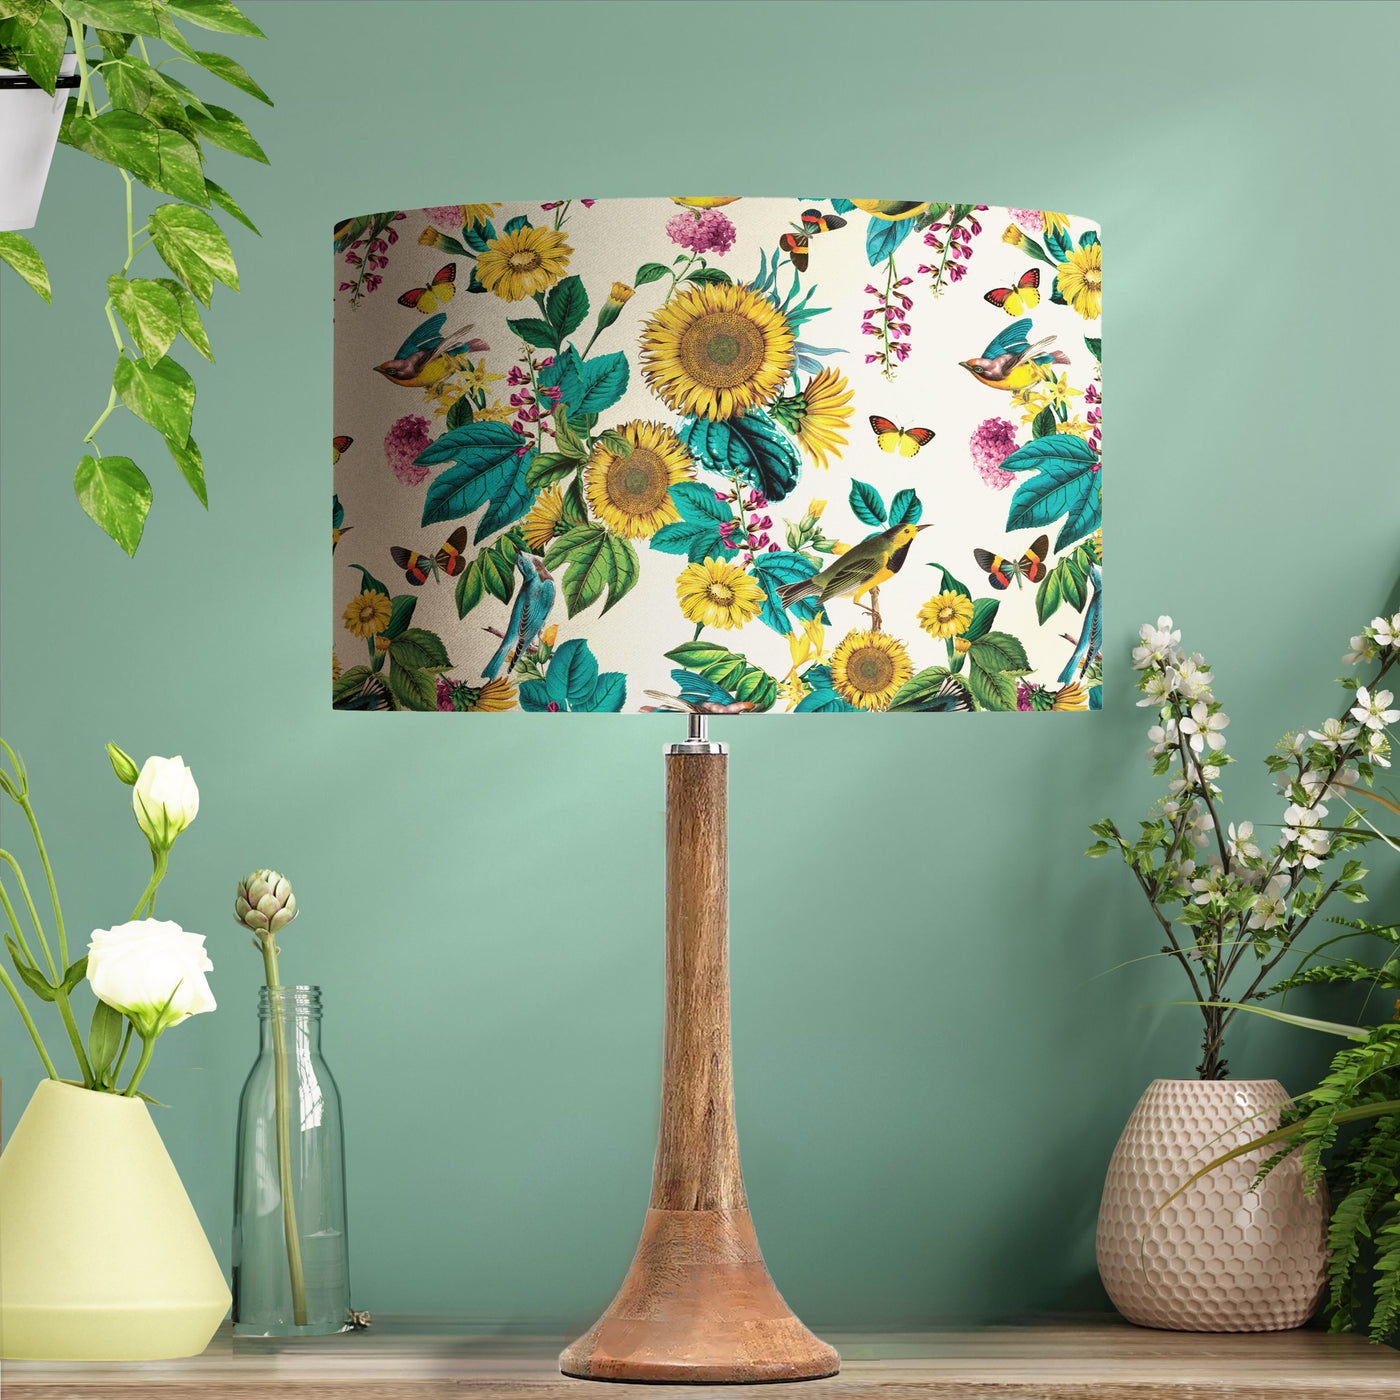 Silver Lined Lampshade with Birds and Sunflowers in Cream